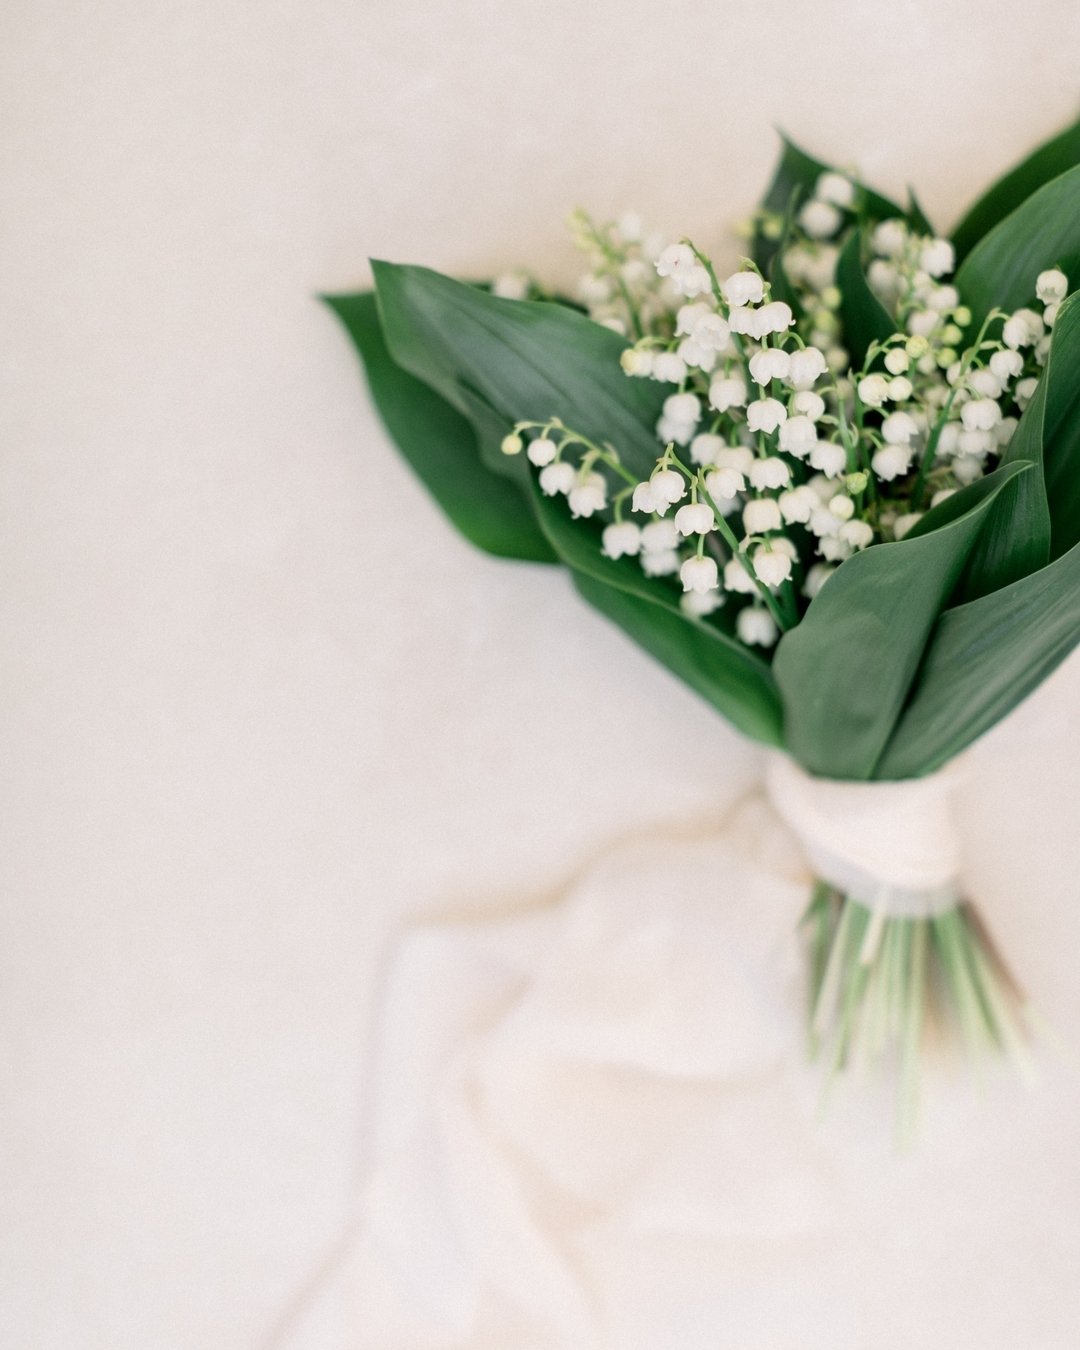 Scroll through for some Lily of the Valley inspiration. Lily of the Valley is a premium, luxury bloom. It smells heavenly, is very petite, and is in the shape of a perfect bell. We added some moss clusters to the table to really showcase it's beauty!